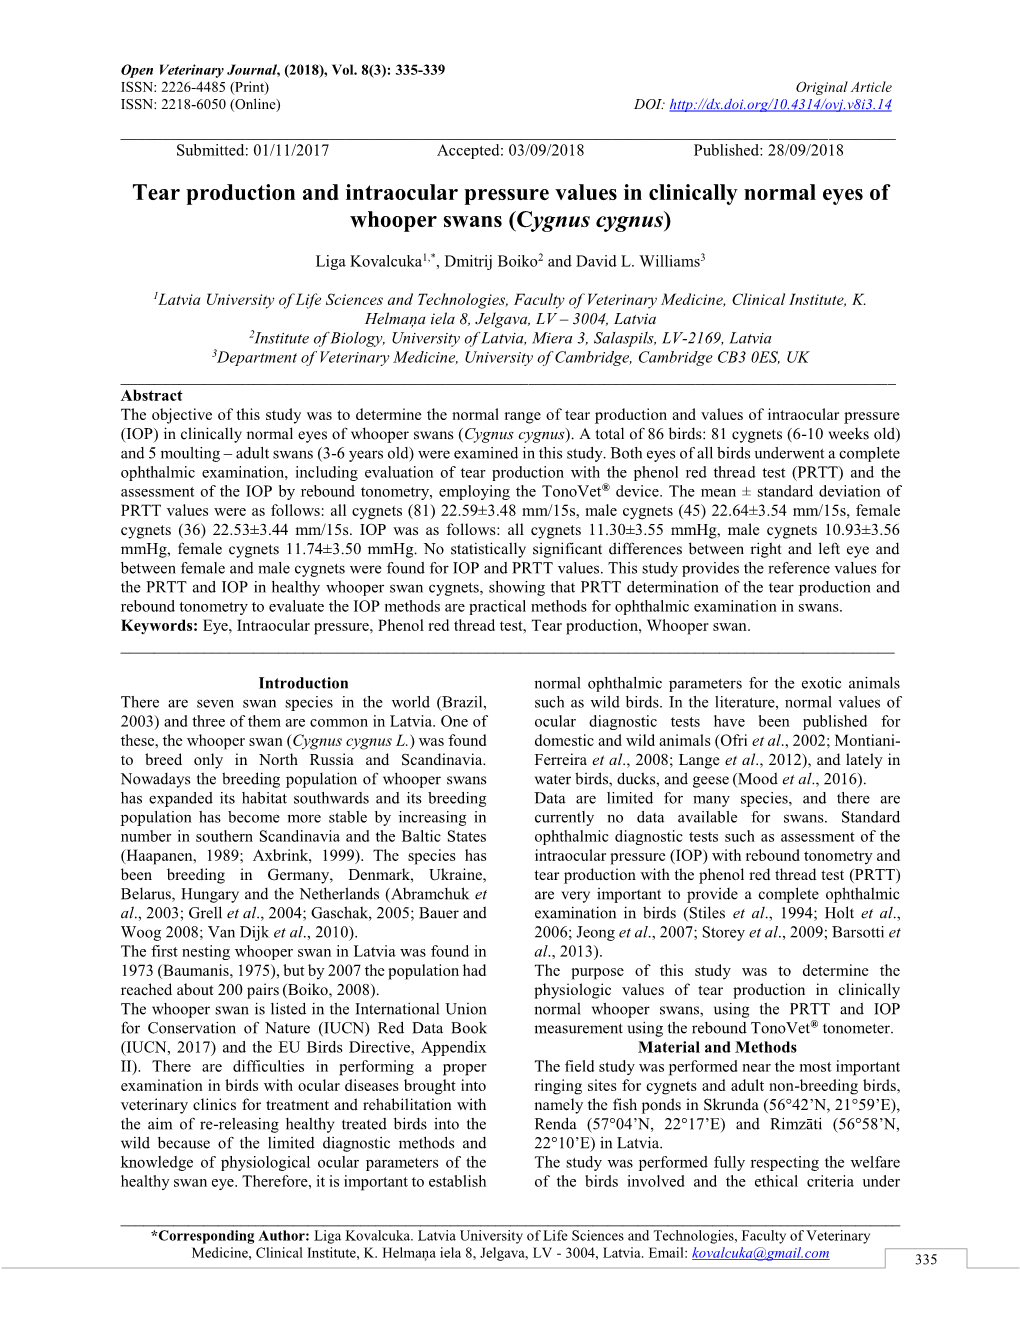 Tear Production and Intraocular Pressure Values in Clinically Normal Eyes of Whooper Swans (Cygnus Cygnus)